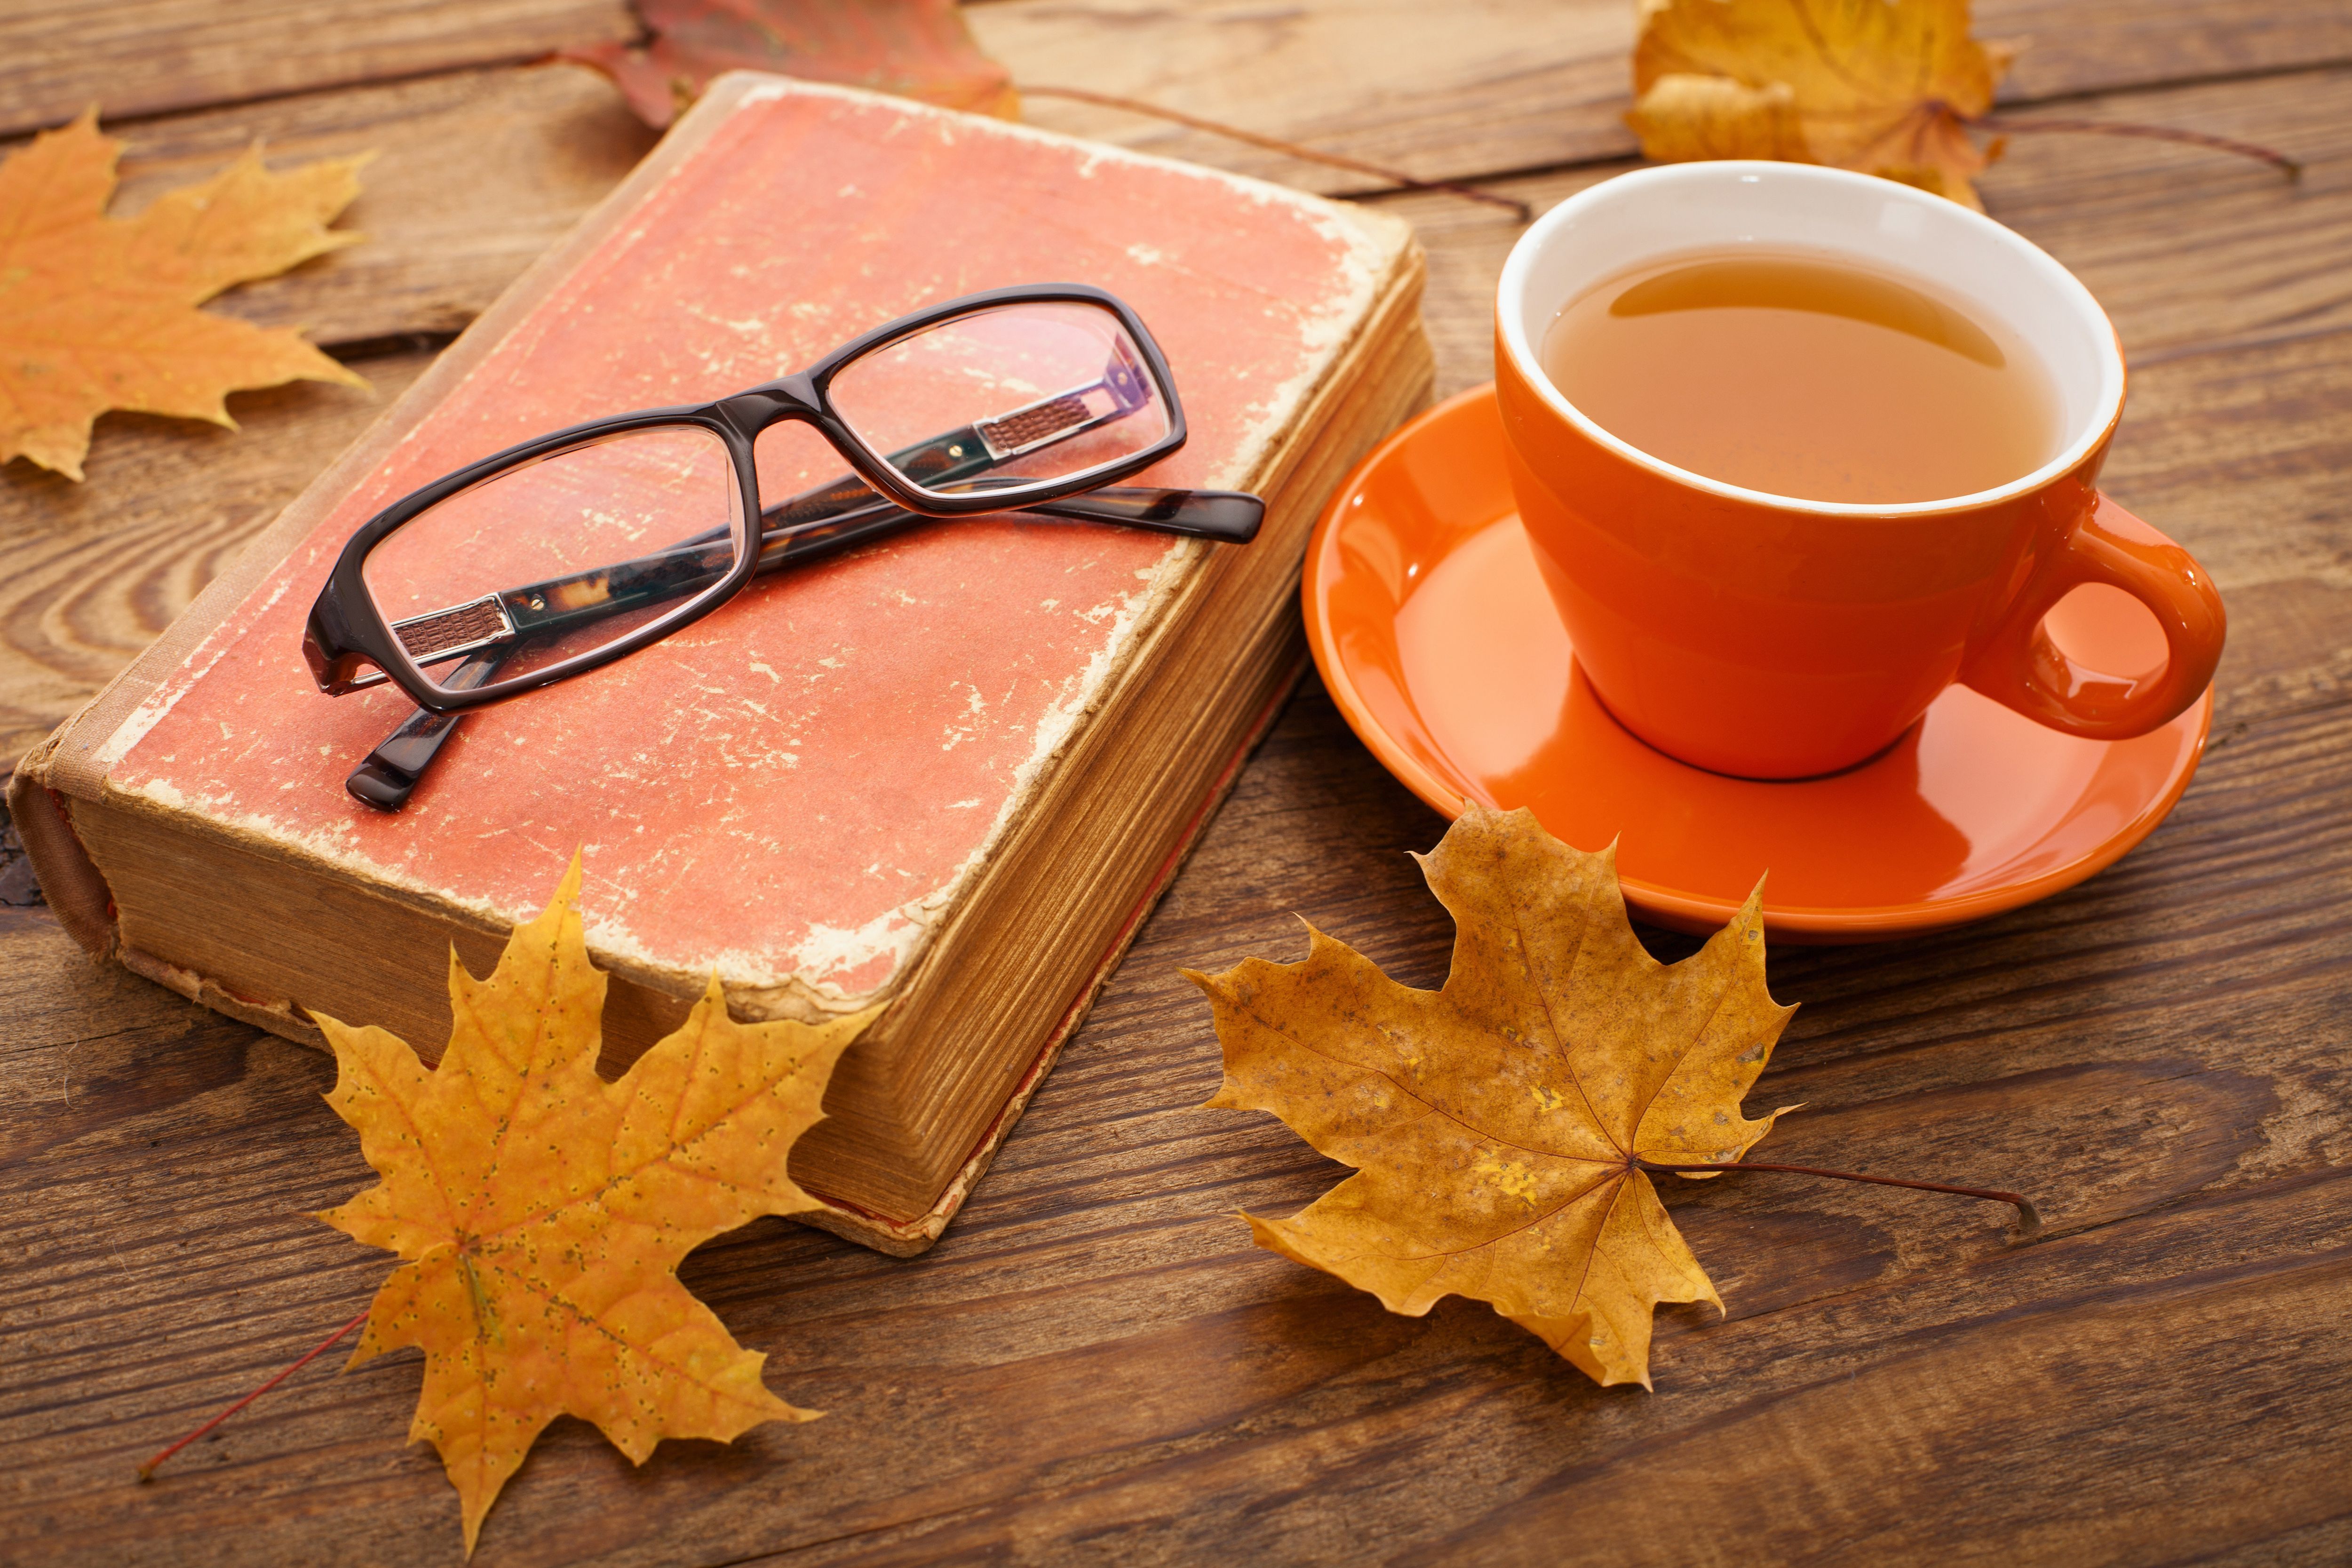 A cup of tea and a book on a wooden table - Vintage fall